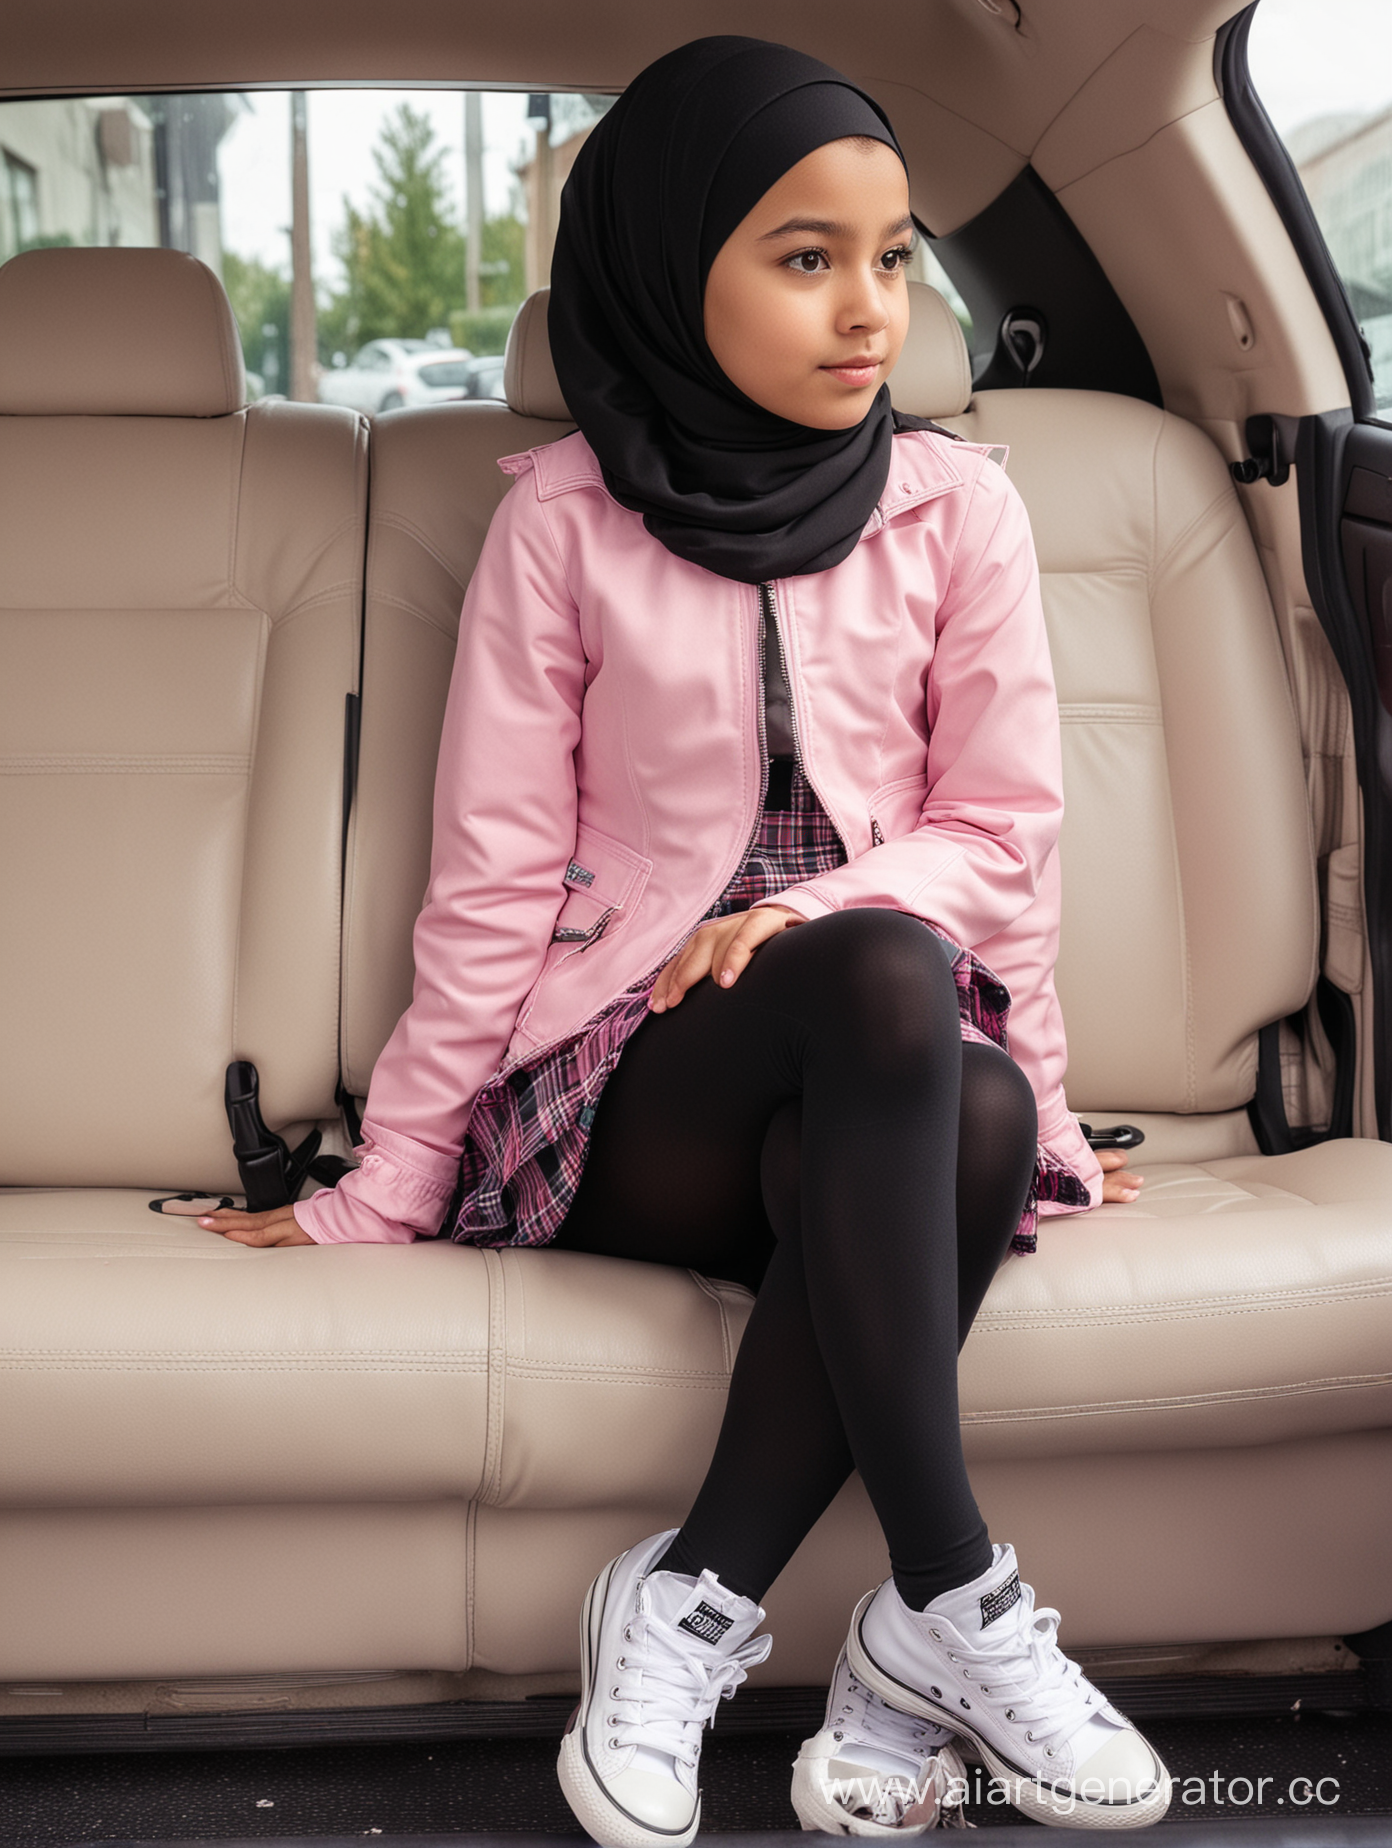 A little girl, 12 years old, hijab, mini school skirt, black opaque tights, sits on the car seat , from the side, pov, white converse shoes, high detailed, pink jacket